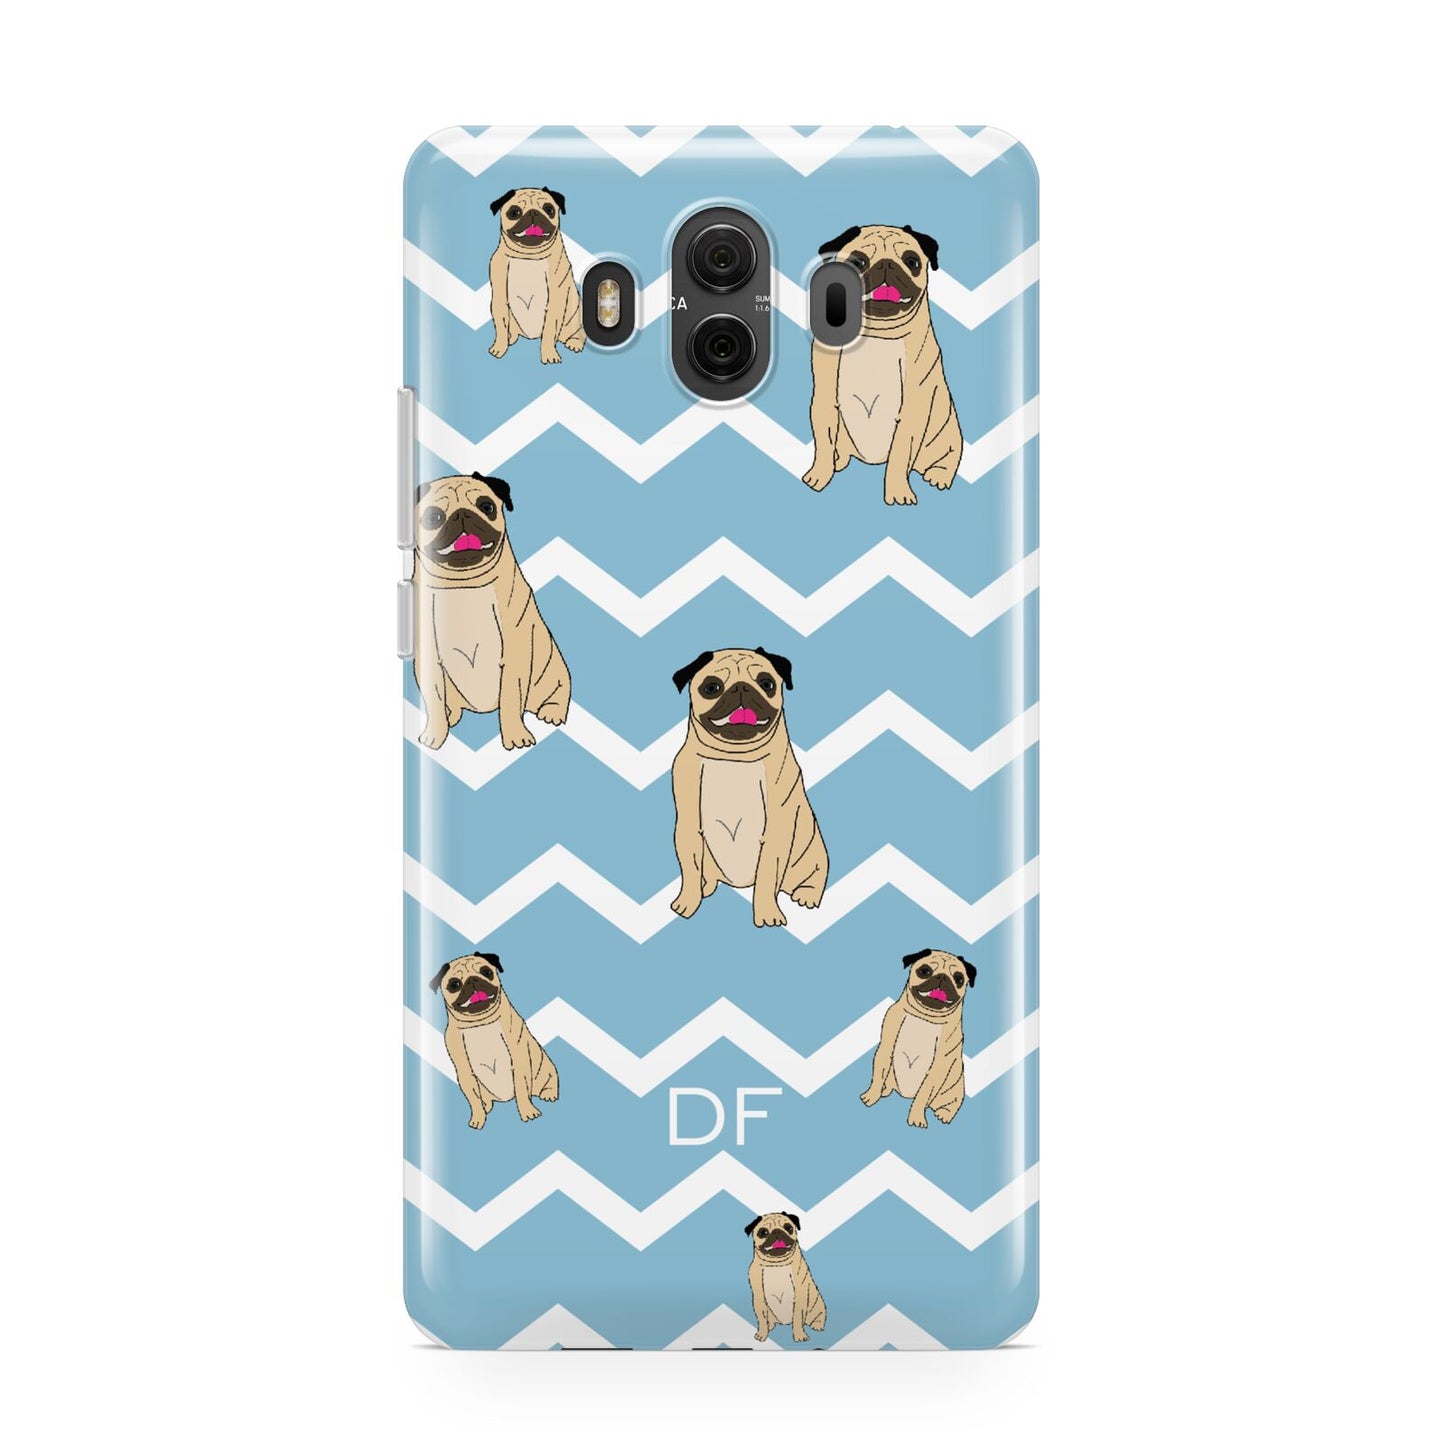 Personalised Pug Initials Huawei Mate 10 Protective Phone Case